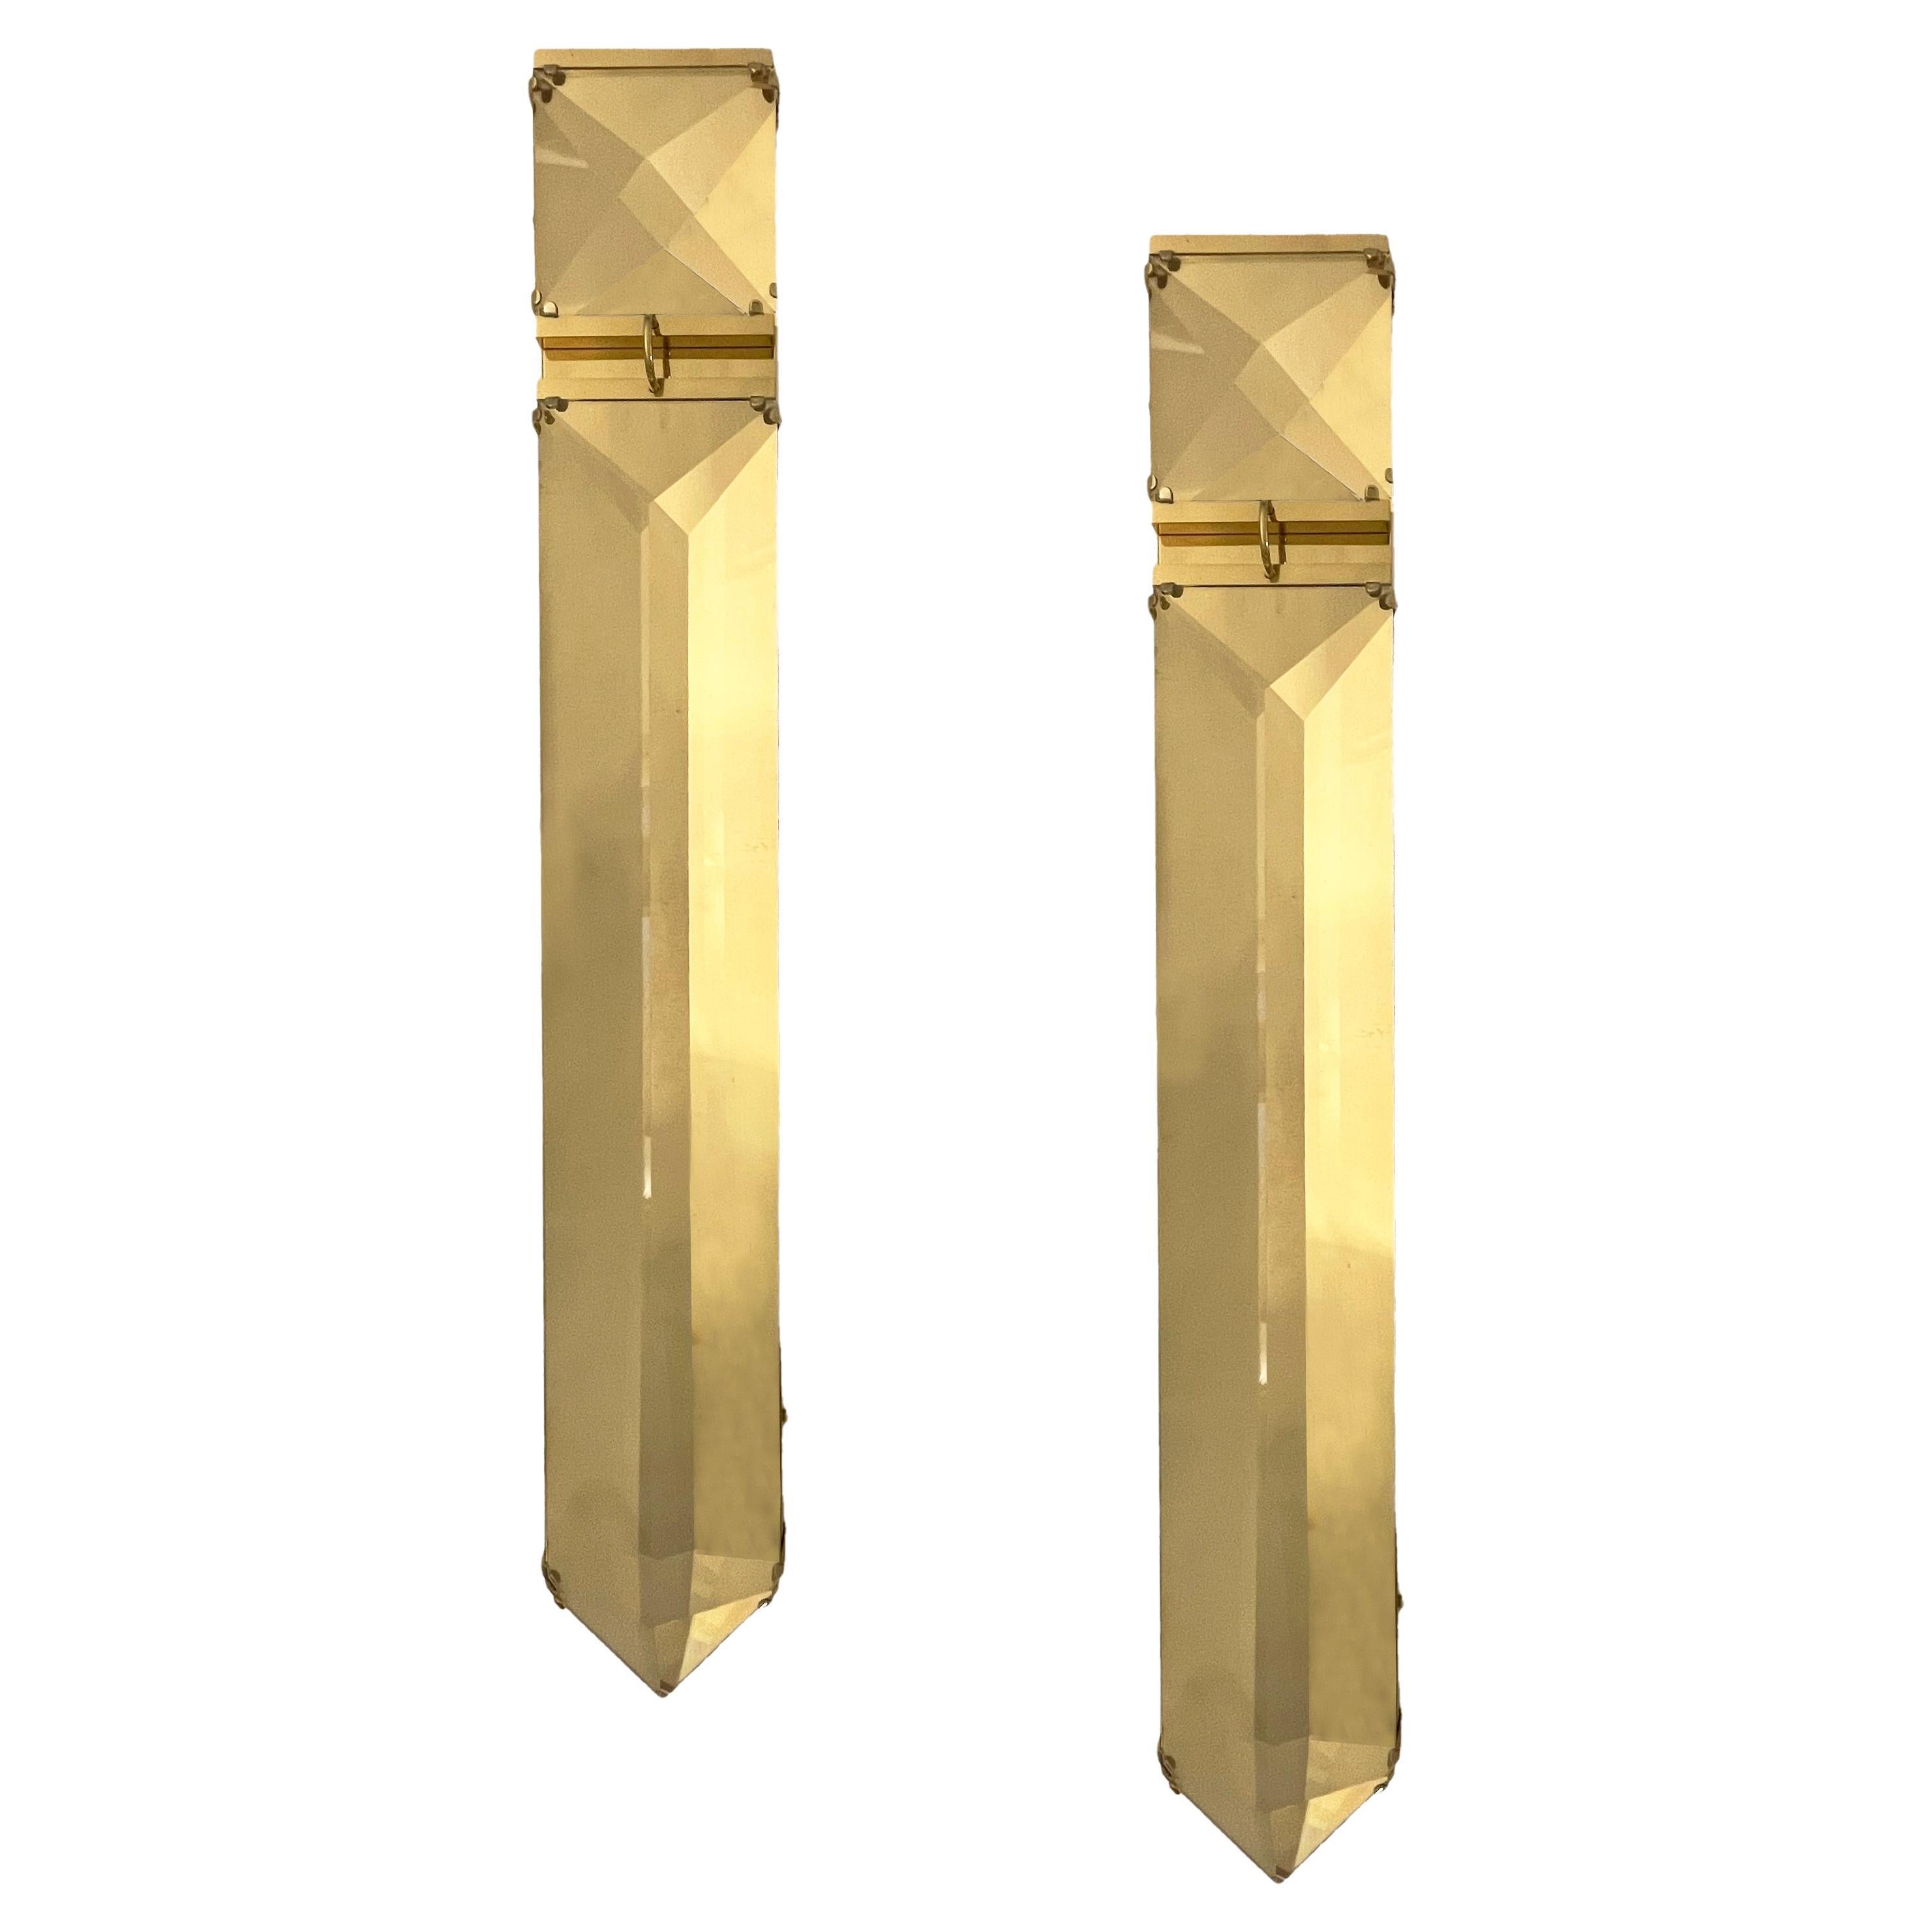 Italian Hollywood Regency Sculptural Crystal Lucite Decorative Tall Wall Lights For Sale